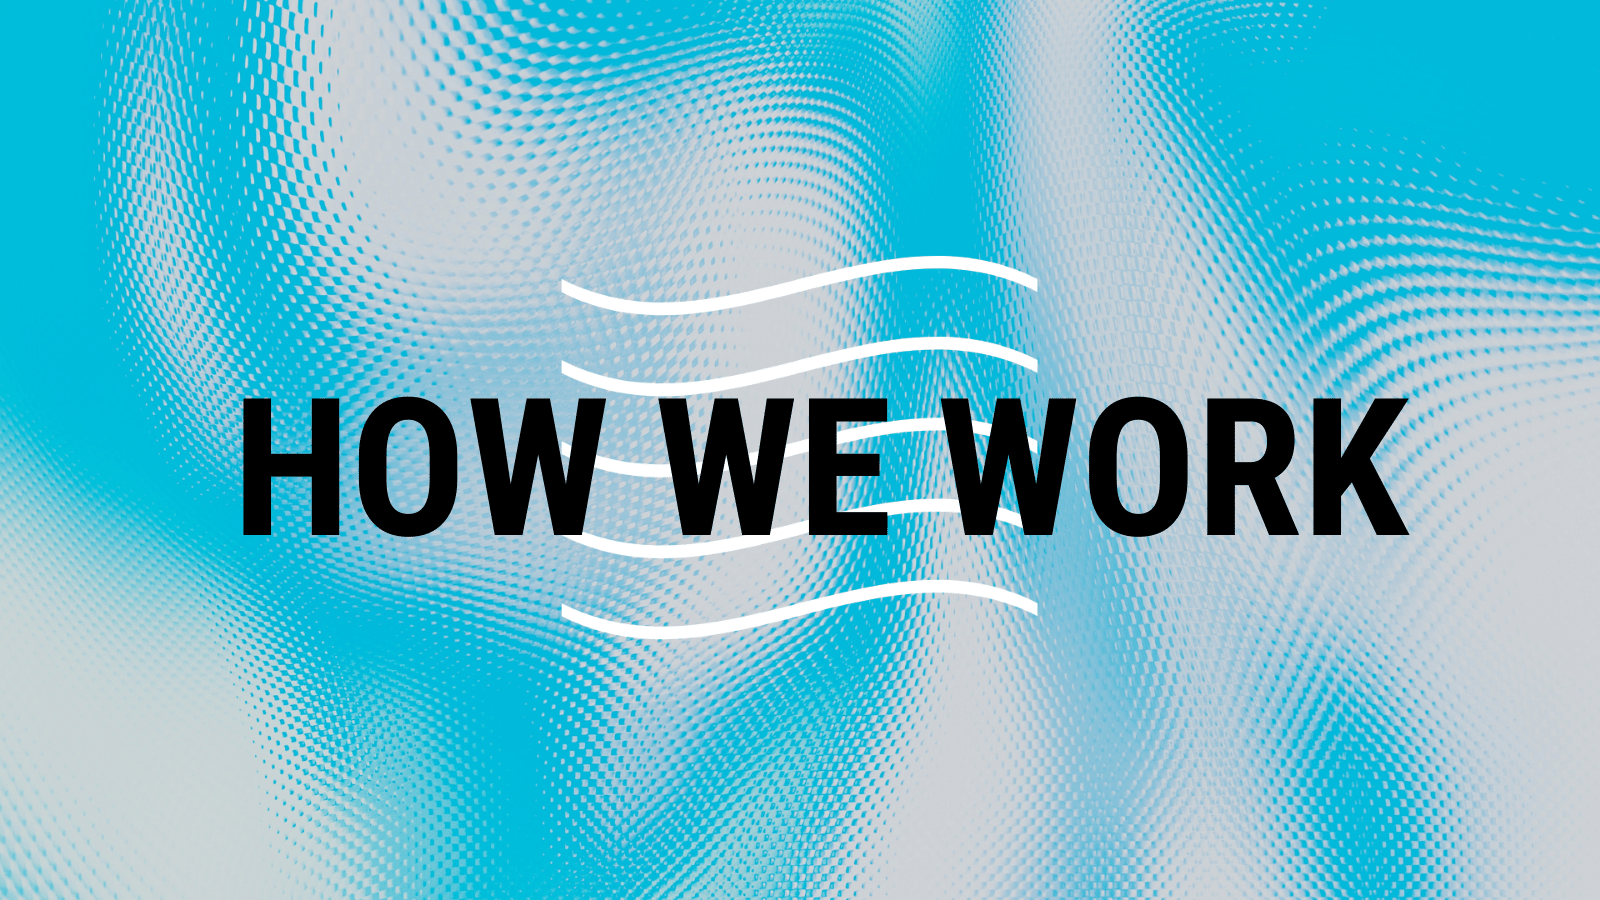 A swirled blue and white banner image that reads "How We Work" in black